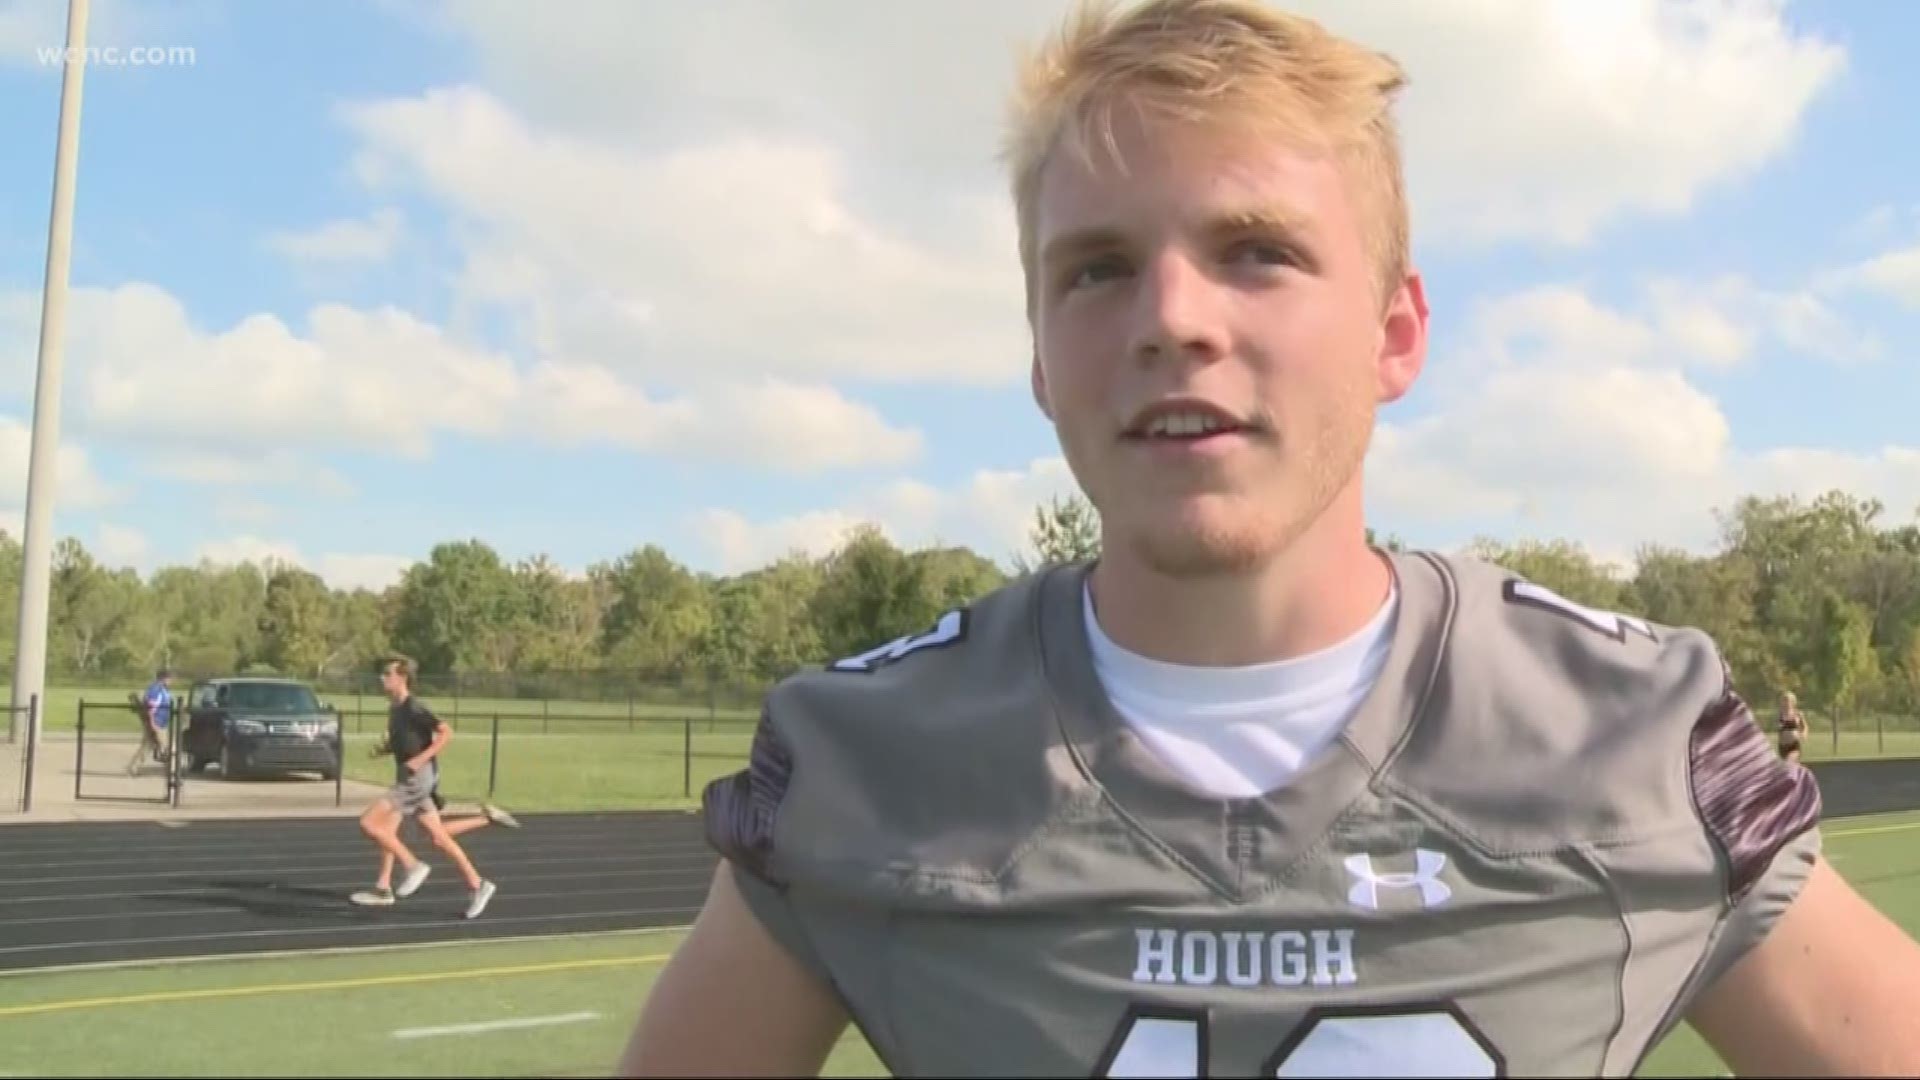 The Hough High School senior is not only excelling on the field but also in the classroom.